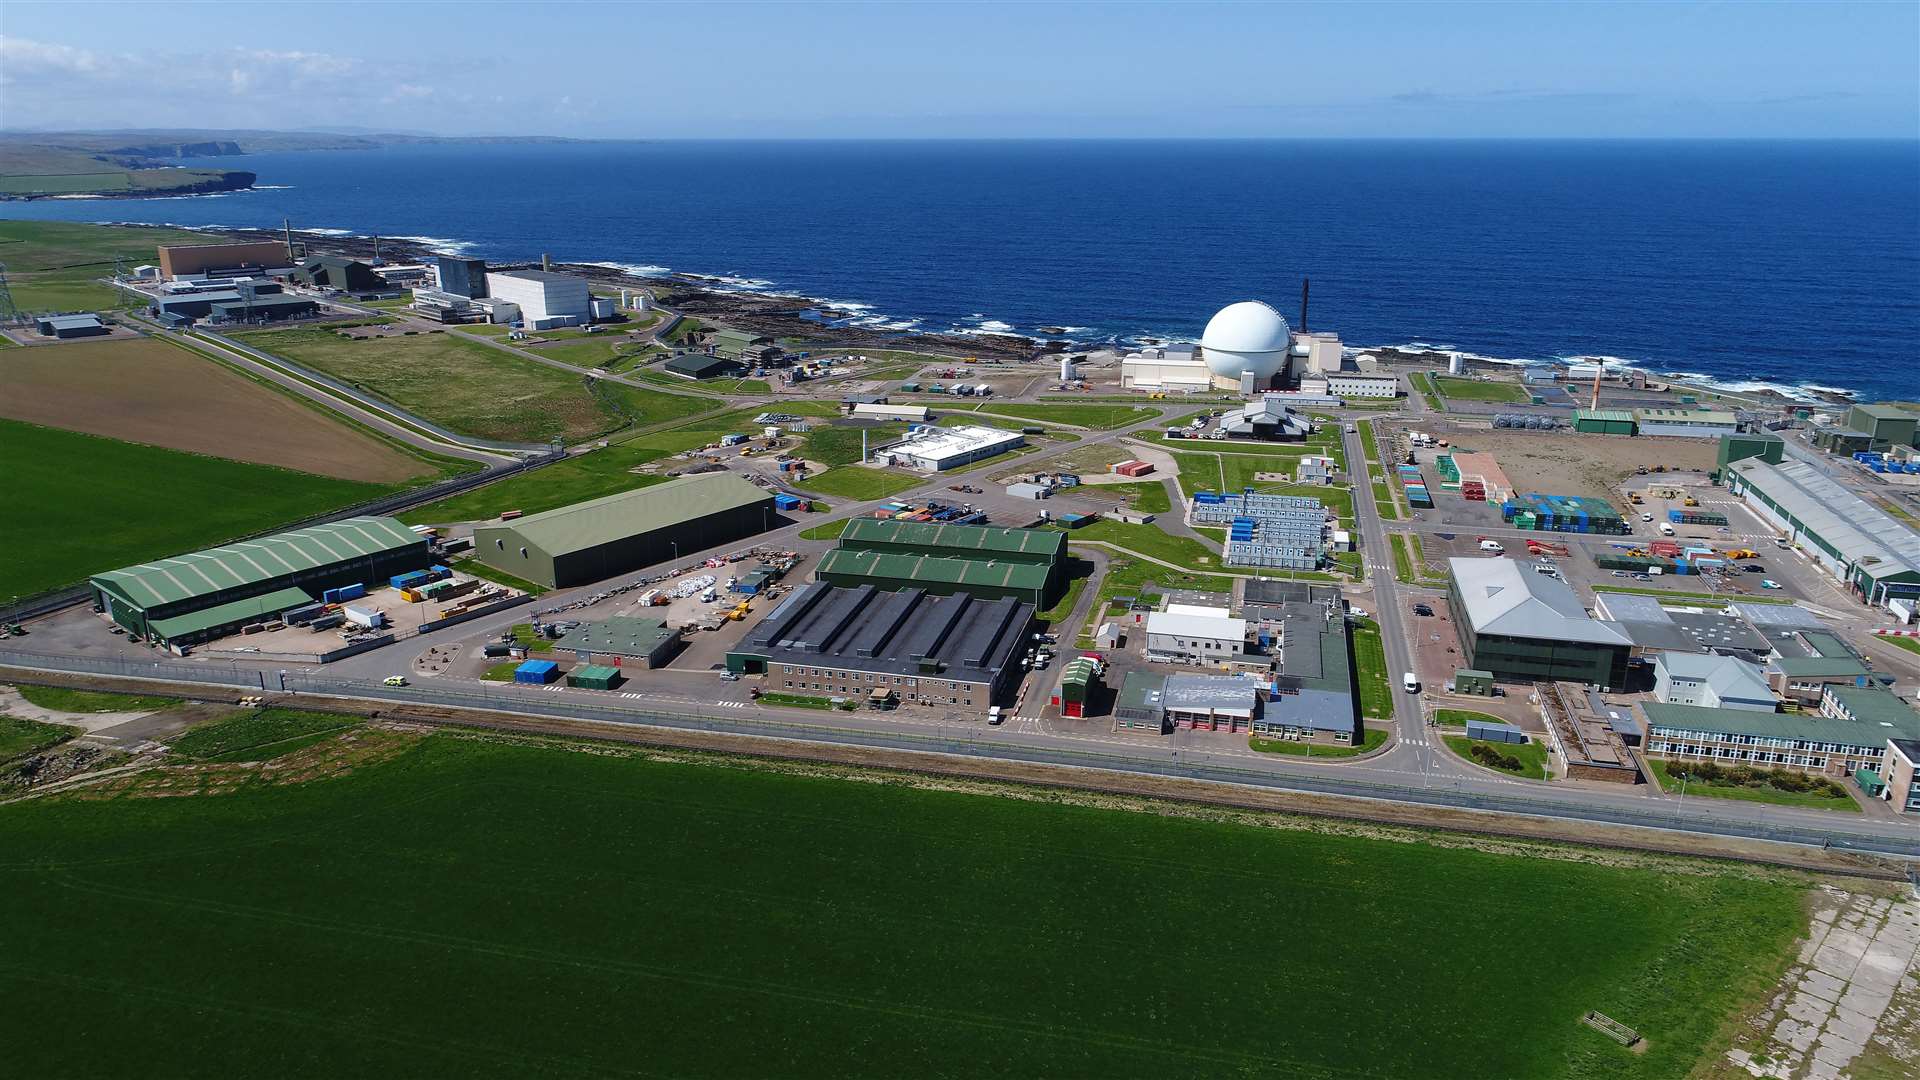 Dounreay is one of two sites in Scotland preparing a potential bid to host the world's first nuclear fusion power station. Picture: DSRL and NDA